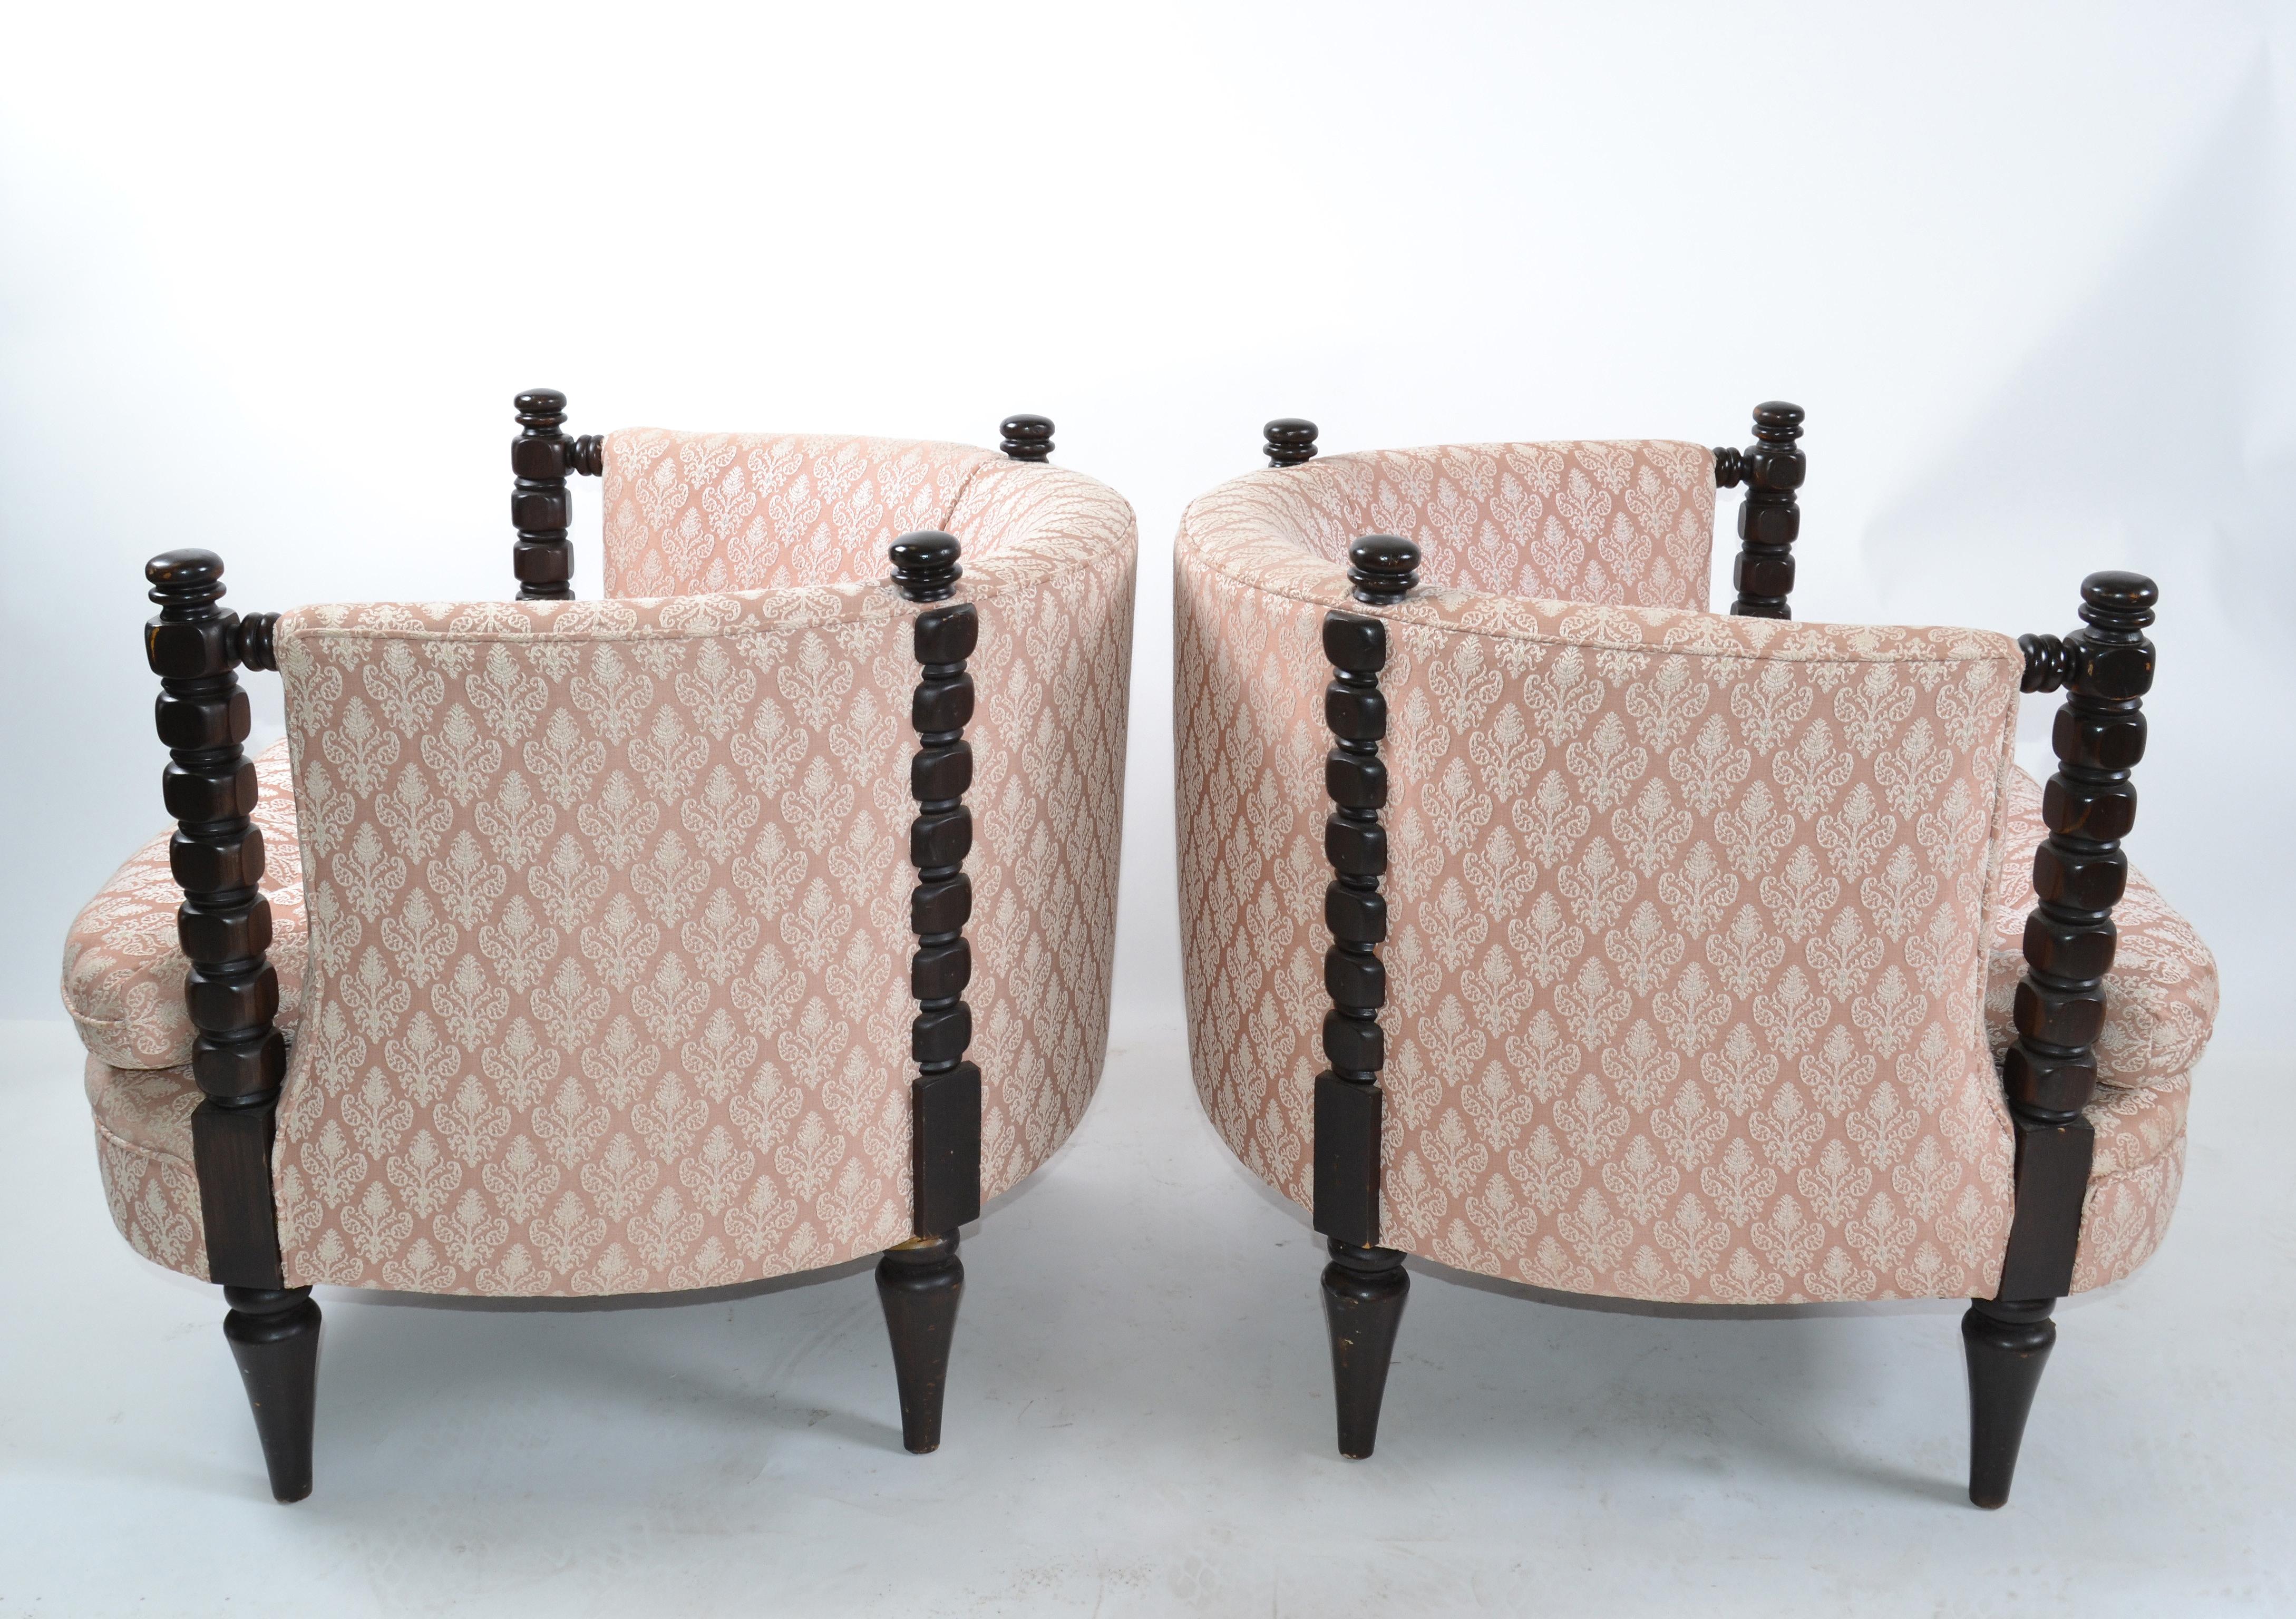 Two neoclassical club or barrel chairs from the 1950s made in America.
Turned wooden legs, arm details and in a pale pink tufted upholstery.
Great chairs for your favorite reading room.